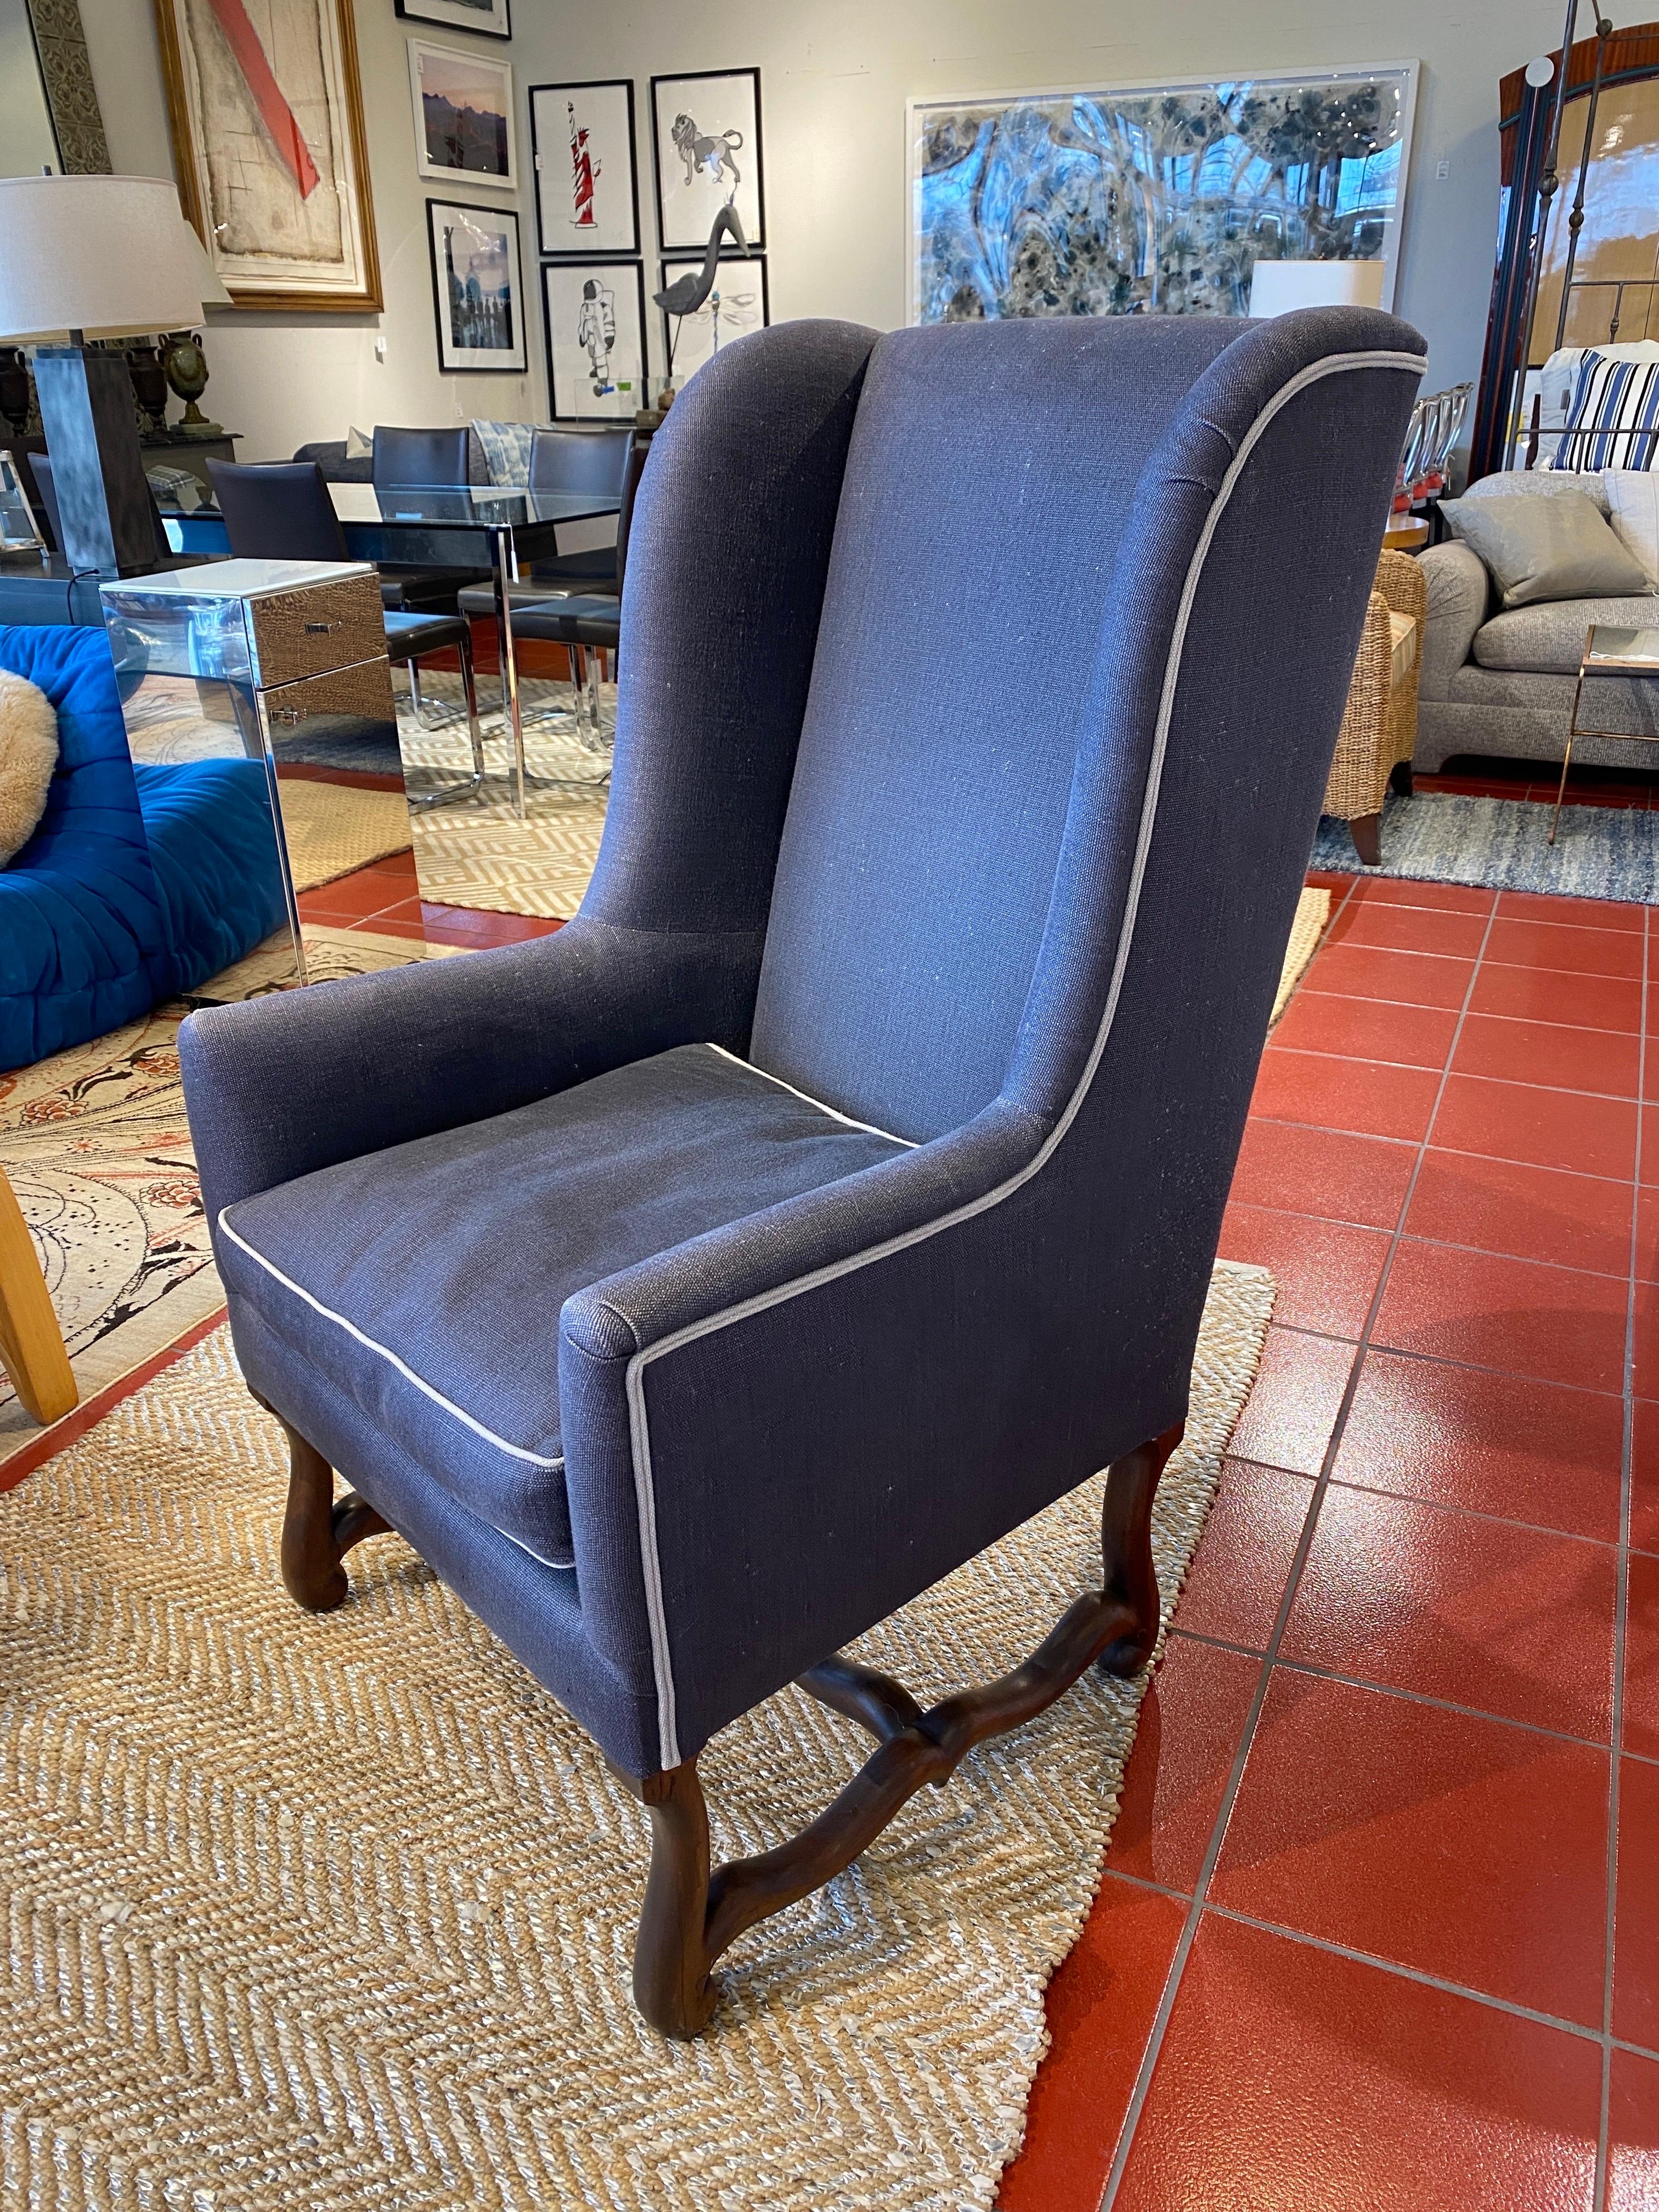 Vintage custom Swedish wingback chair. Unique wood work on legs, gorgeous gray/blue fabric with light piping.
.